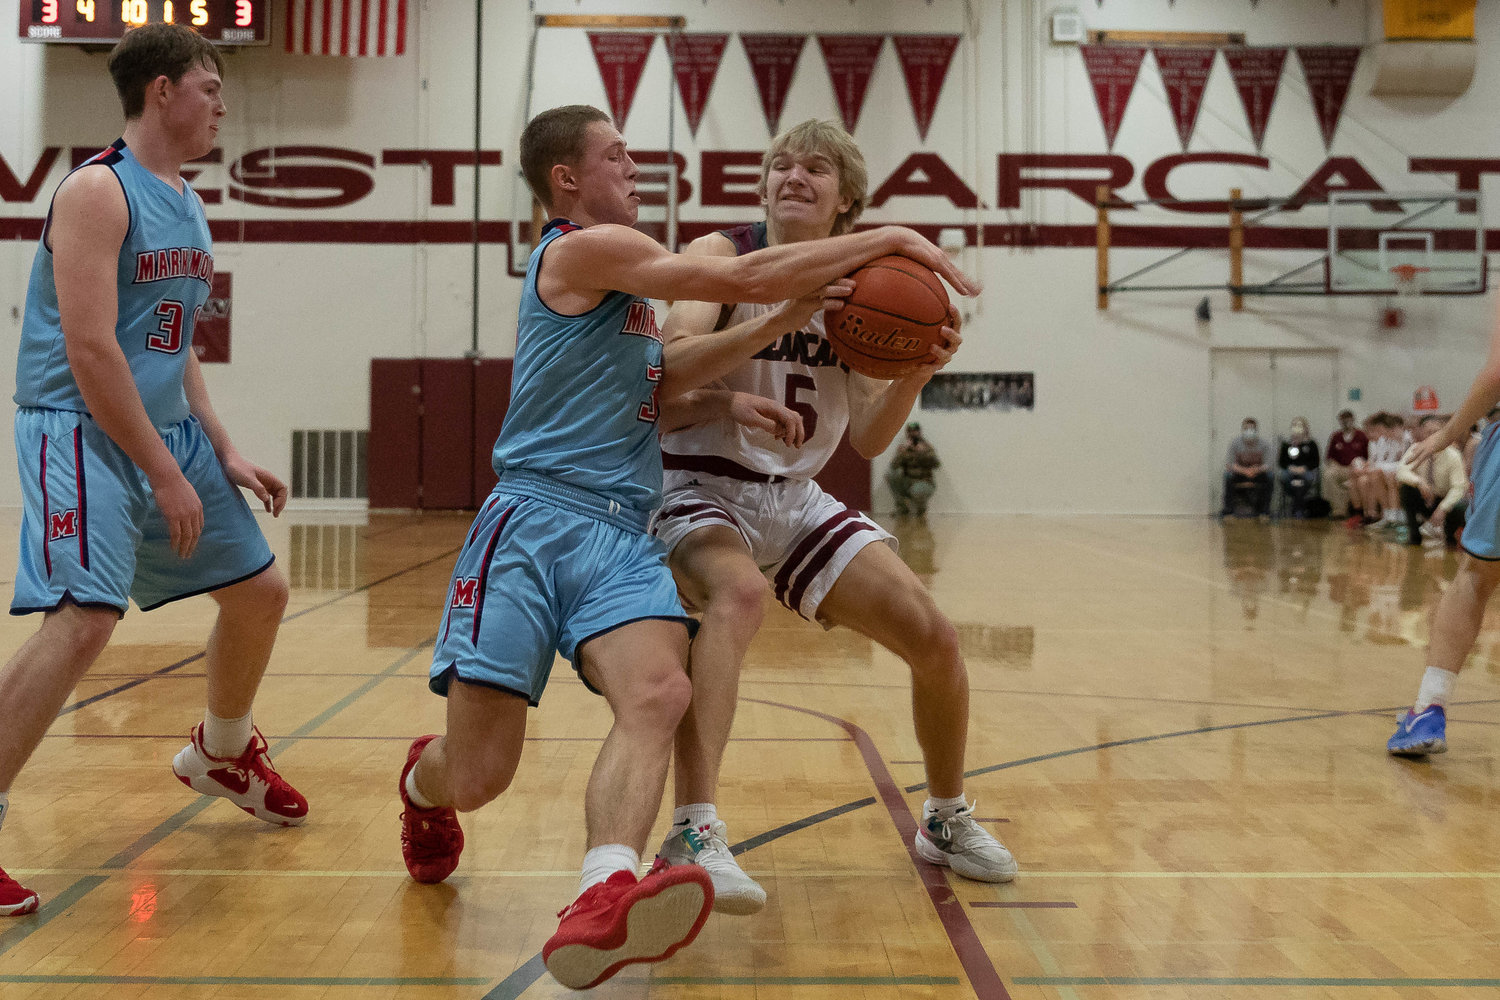 Bearcat guard Dirk Plakinger is stripped by Mark Morris guard Deacon Dietz in a loss to Mark Morris in the opening round of the 2A District IV playoffs in Chehalis Feb. 12.